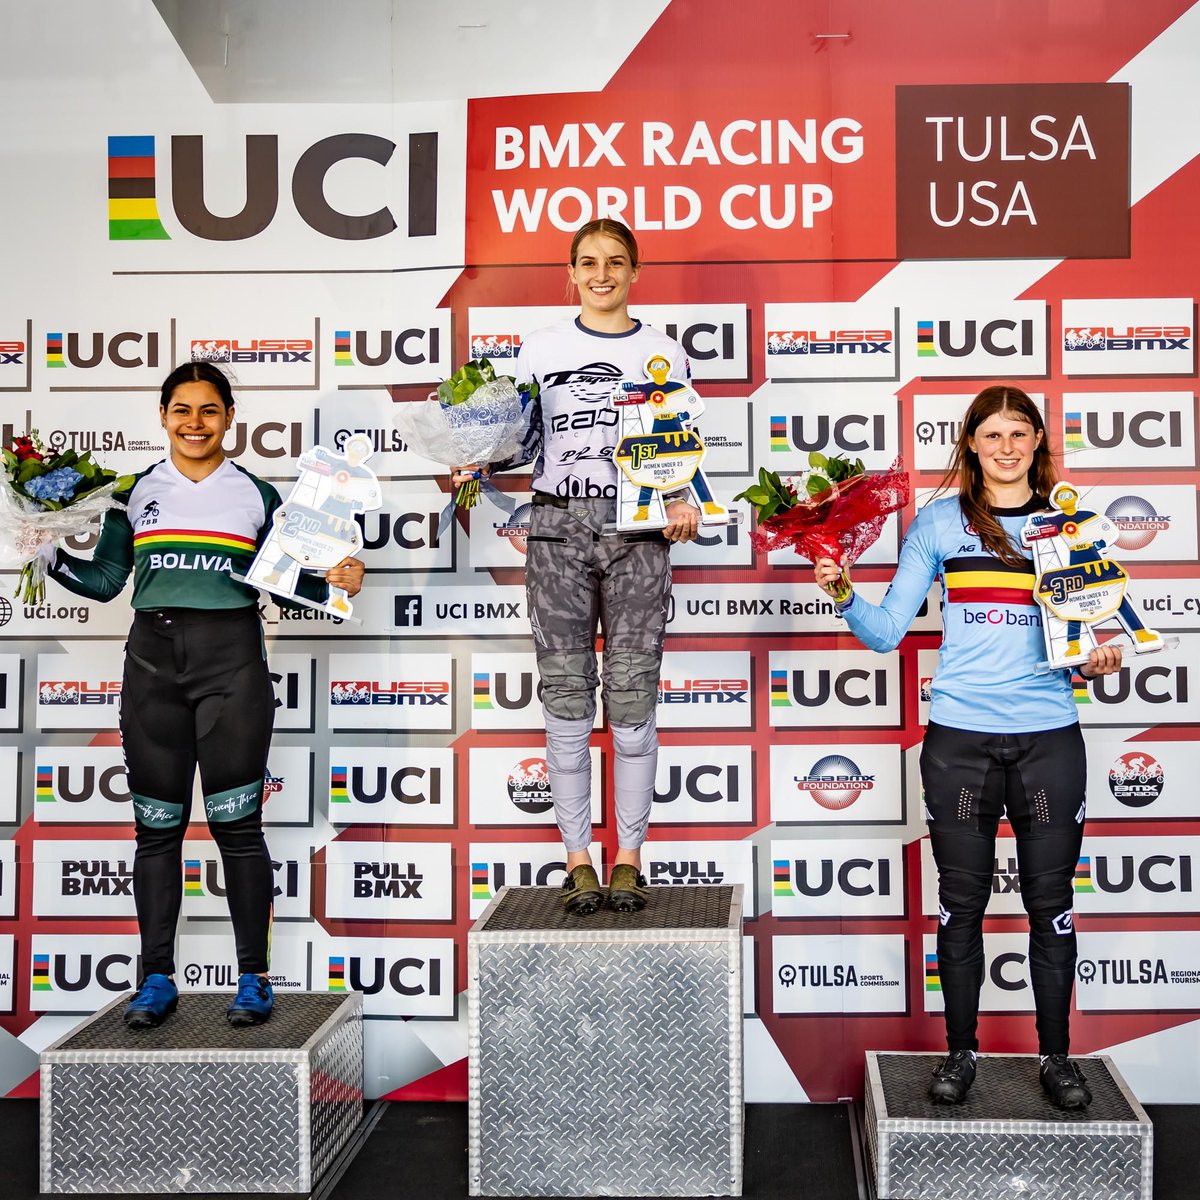 A great end of our 2024 @UCI_BMX_Racing World Cup campaign! With a final for Women U23 Aiko Gommers in round 6 (6th) & a 3rd and 4th place for Women U23 Valerie Vossen we can look back at a successful race weekend in Tulsa 🇺🇸 🔥 #BMXRacingWC